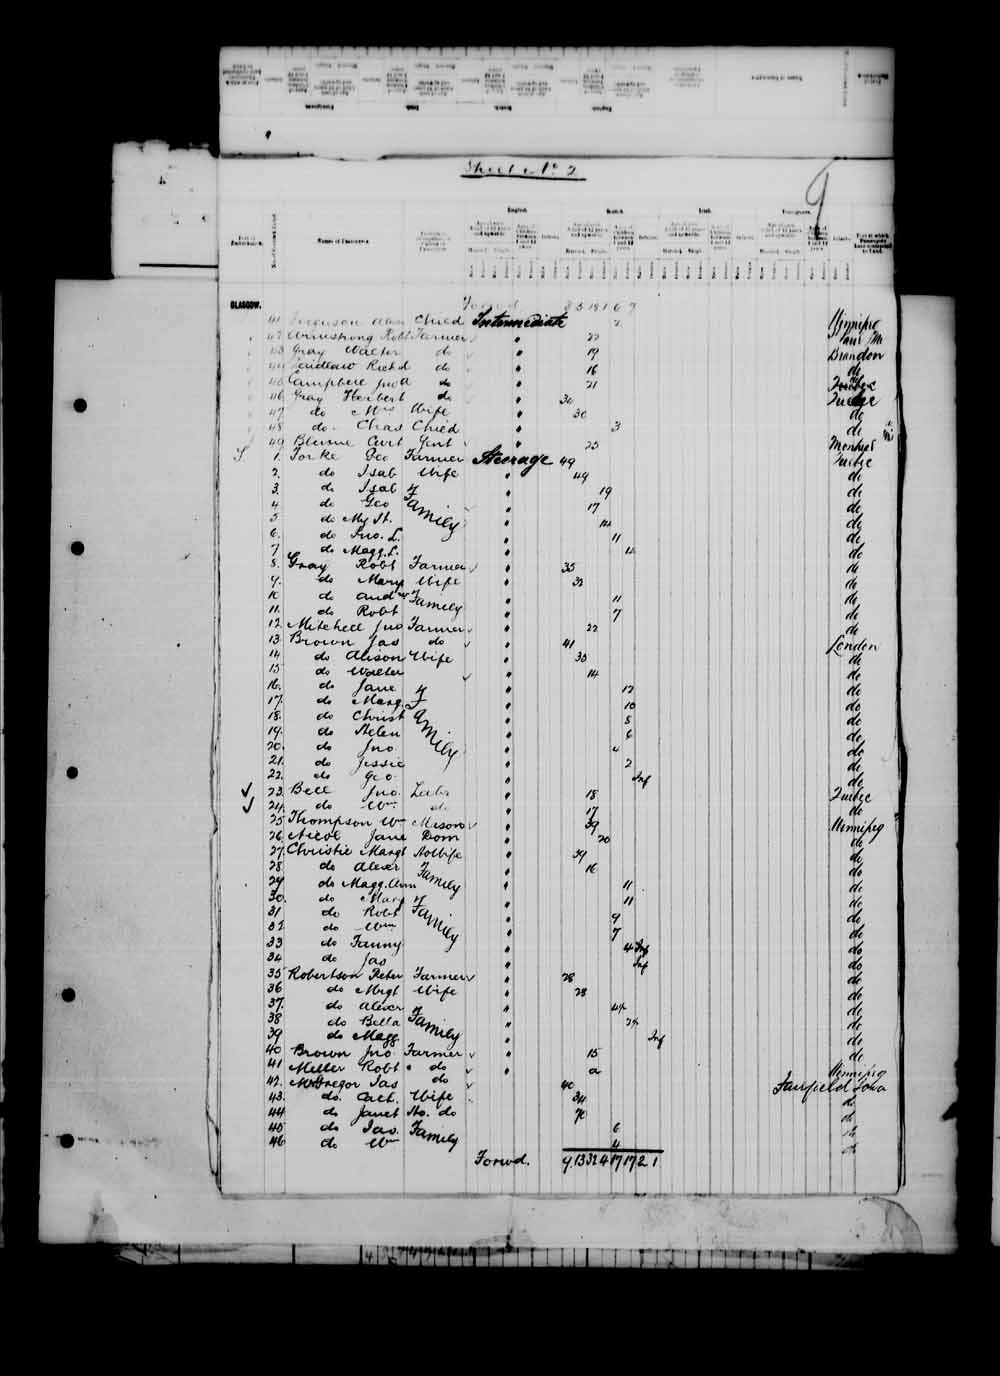 Digitized page of Passenger Lists for Image No.: e003542768